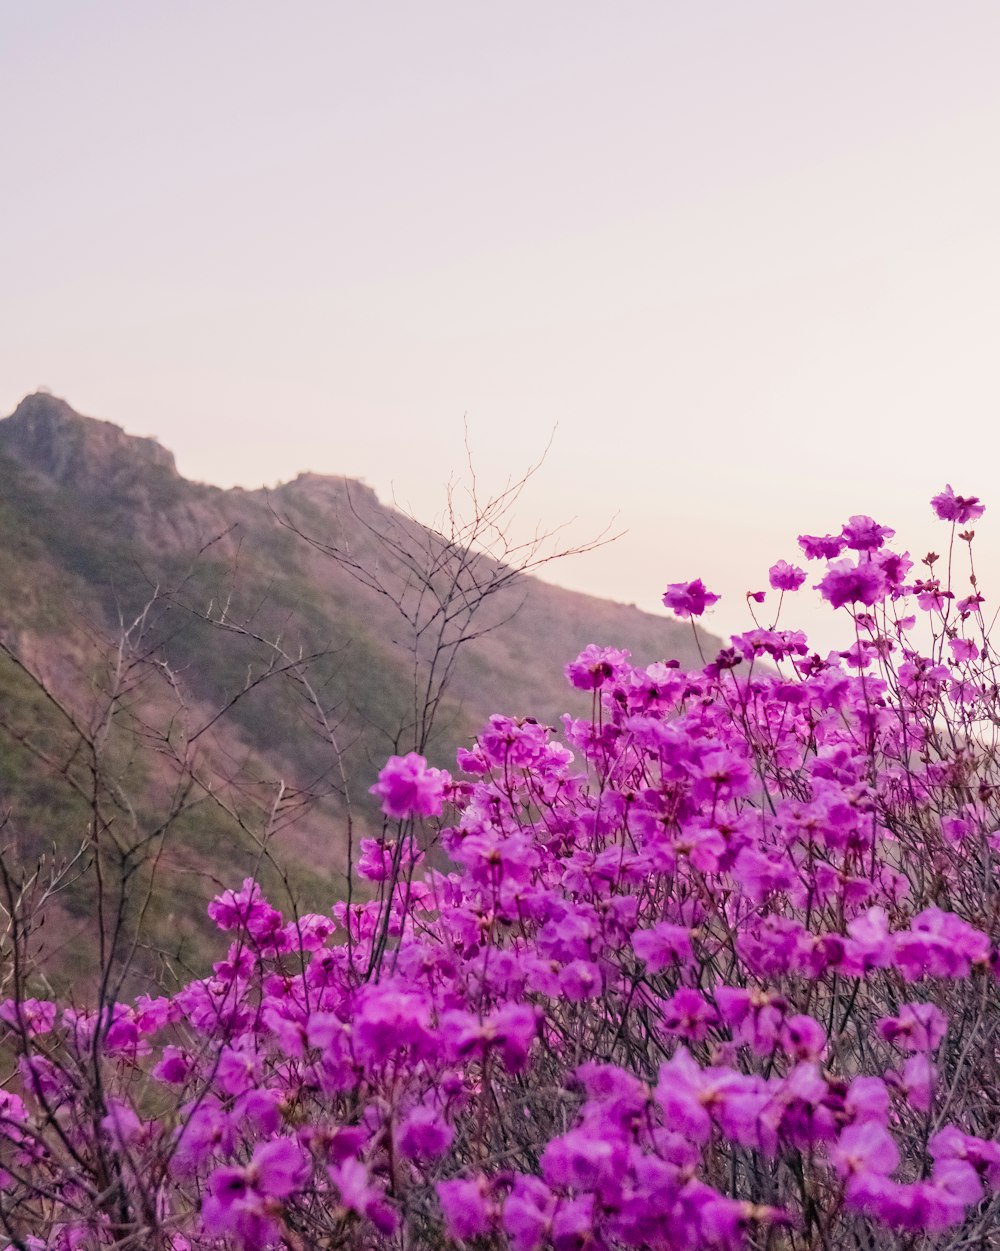 a field of purple flowers with a mountain in the background